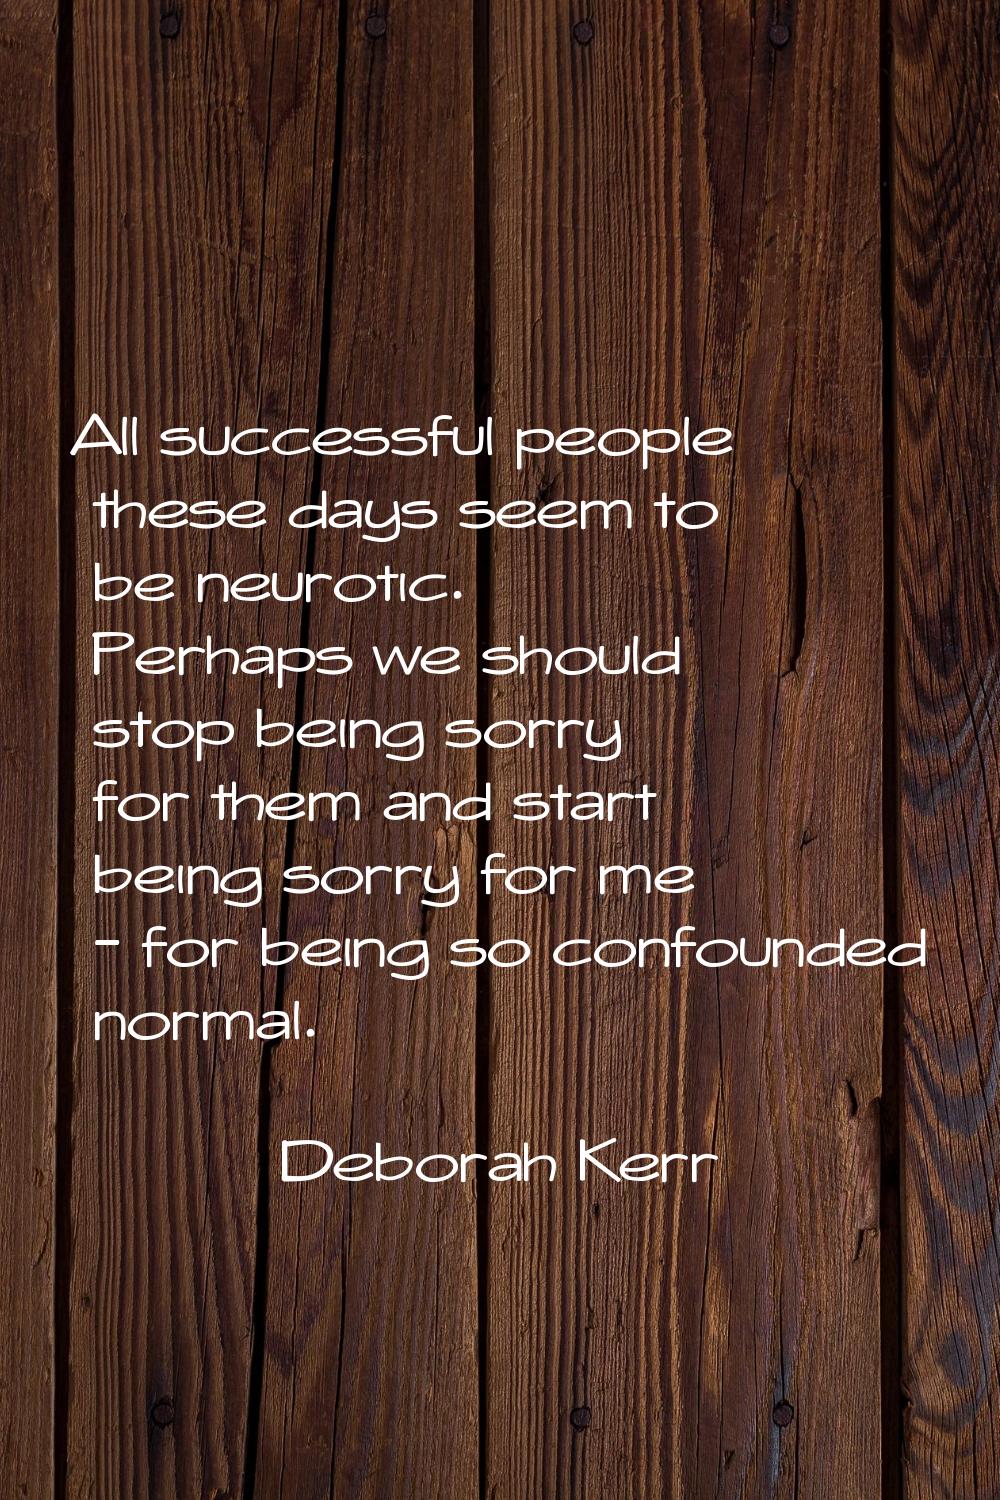 All successful people these days seem to be neurotic. Perhaps we should stop being sorry for them a